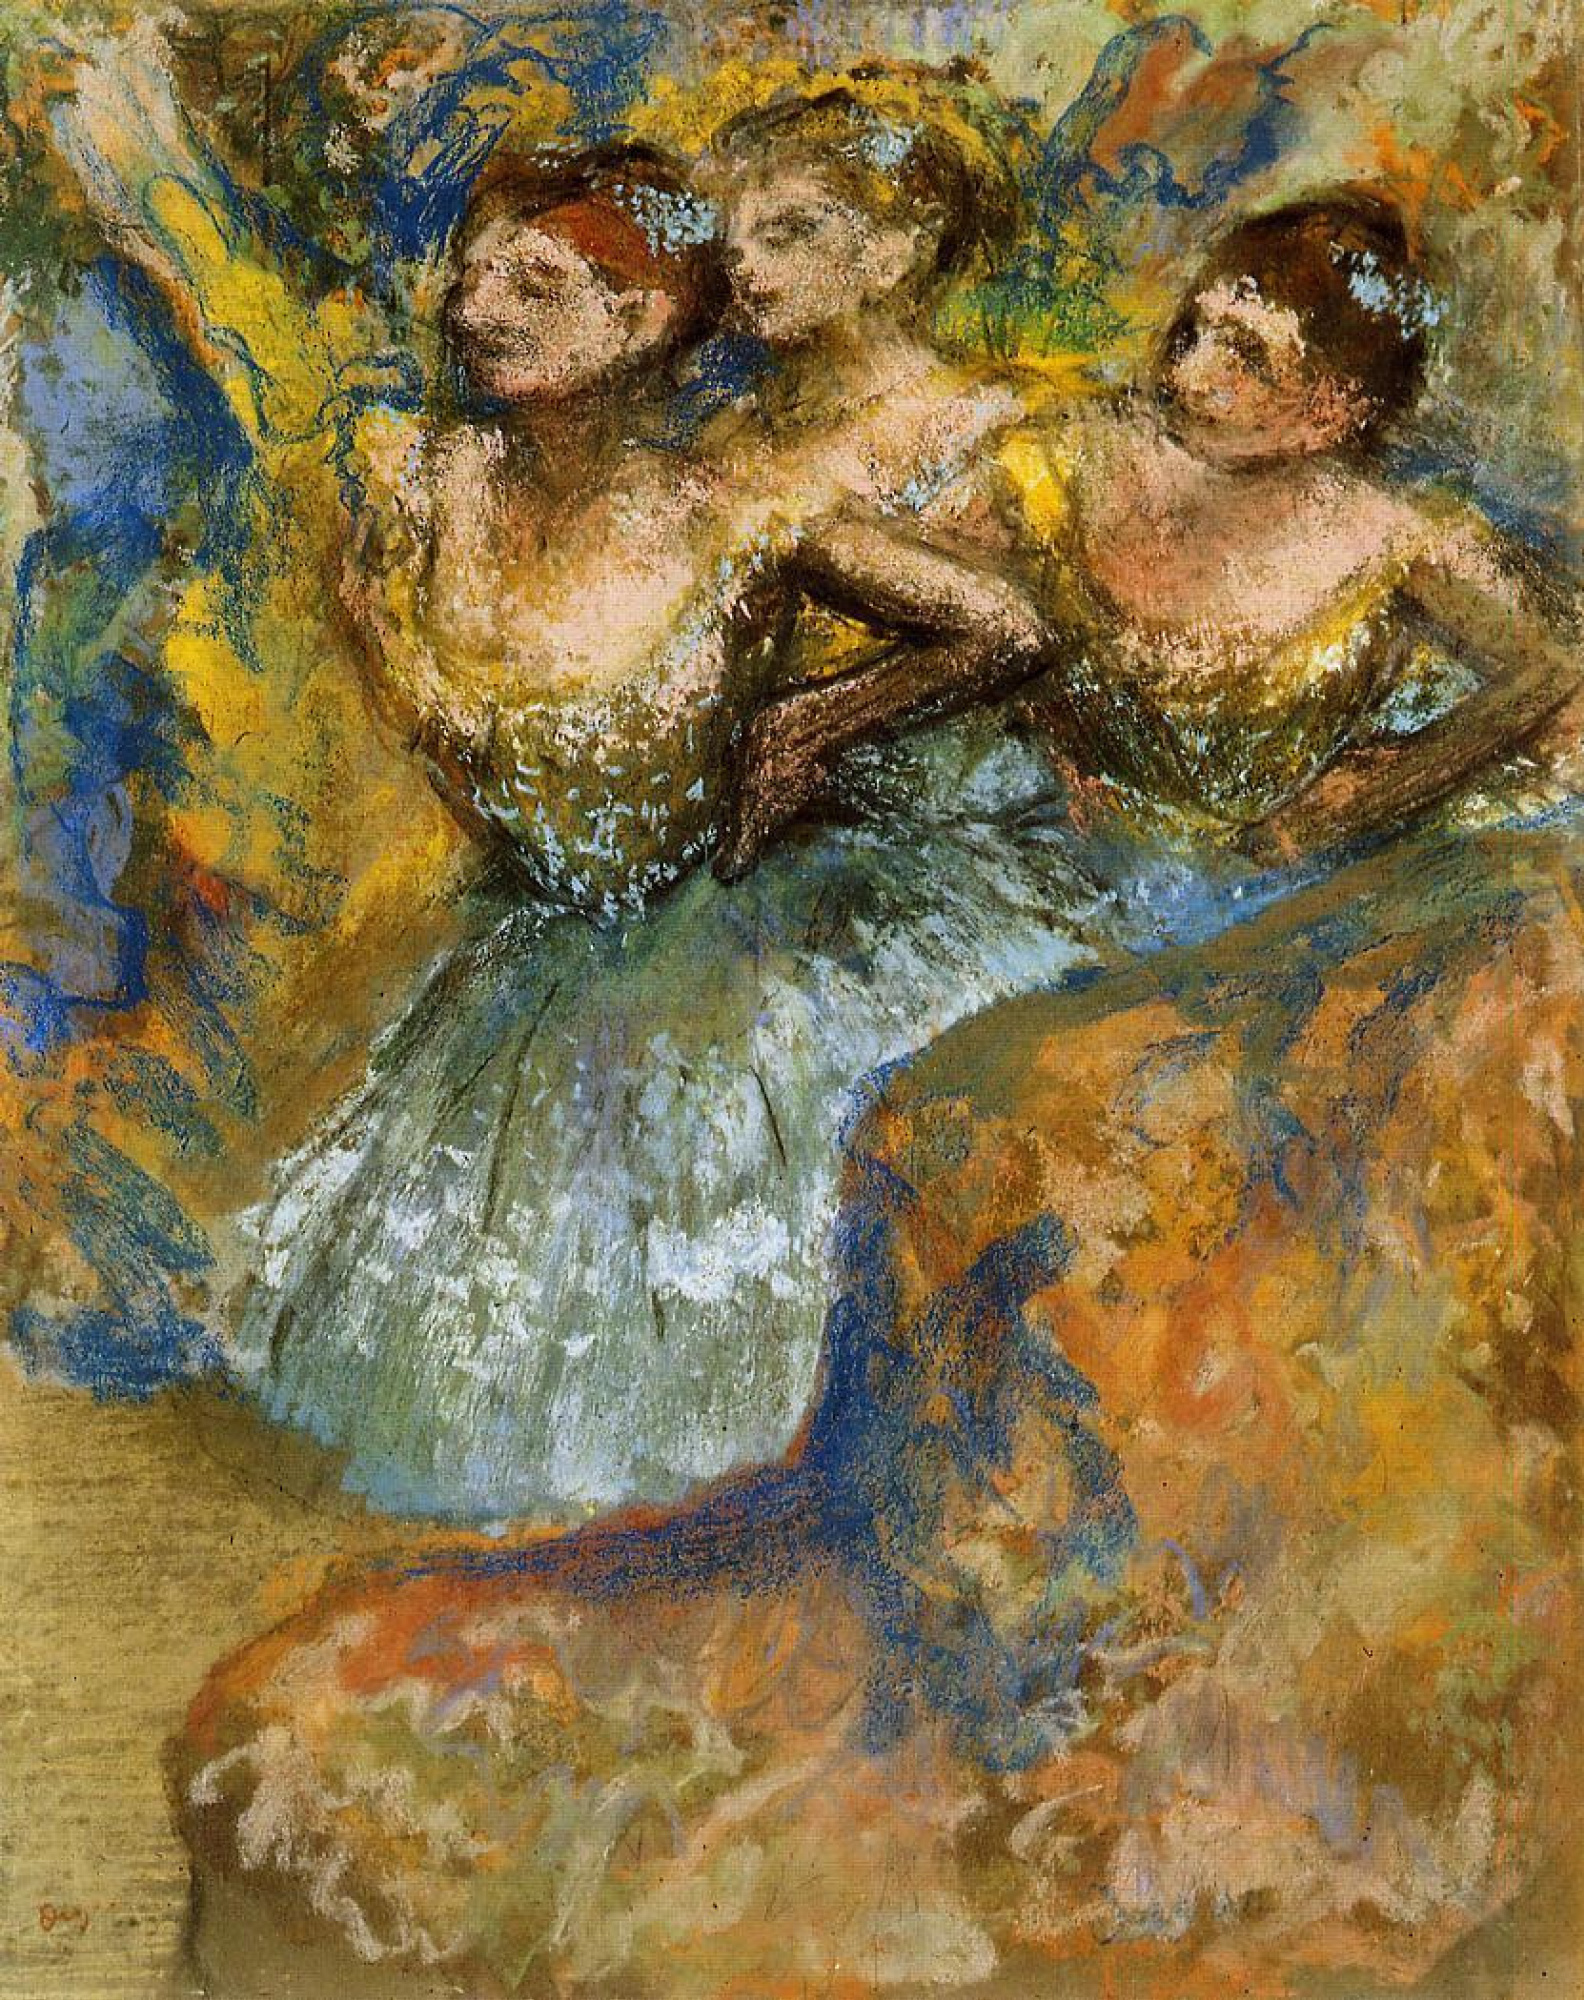 A group of ballerinas, 1910 by Edgar Degas: History, Analysis & Facts |  Arthive